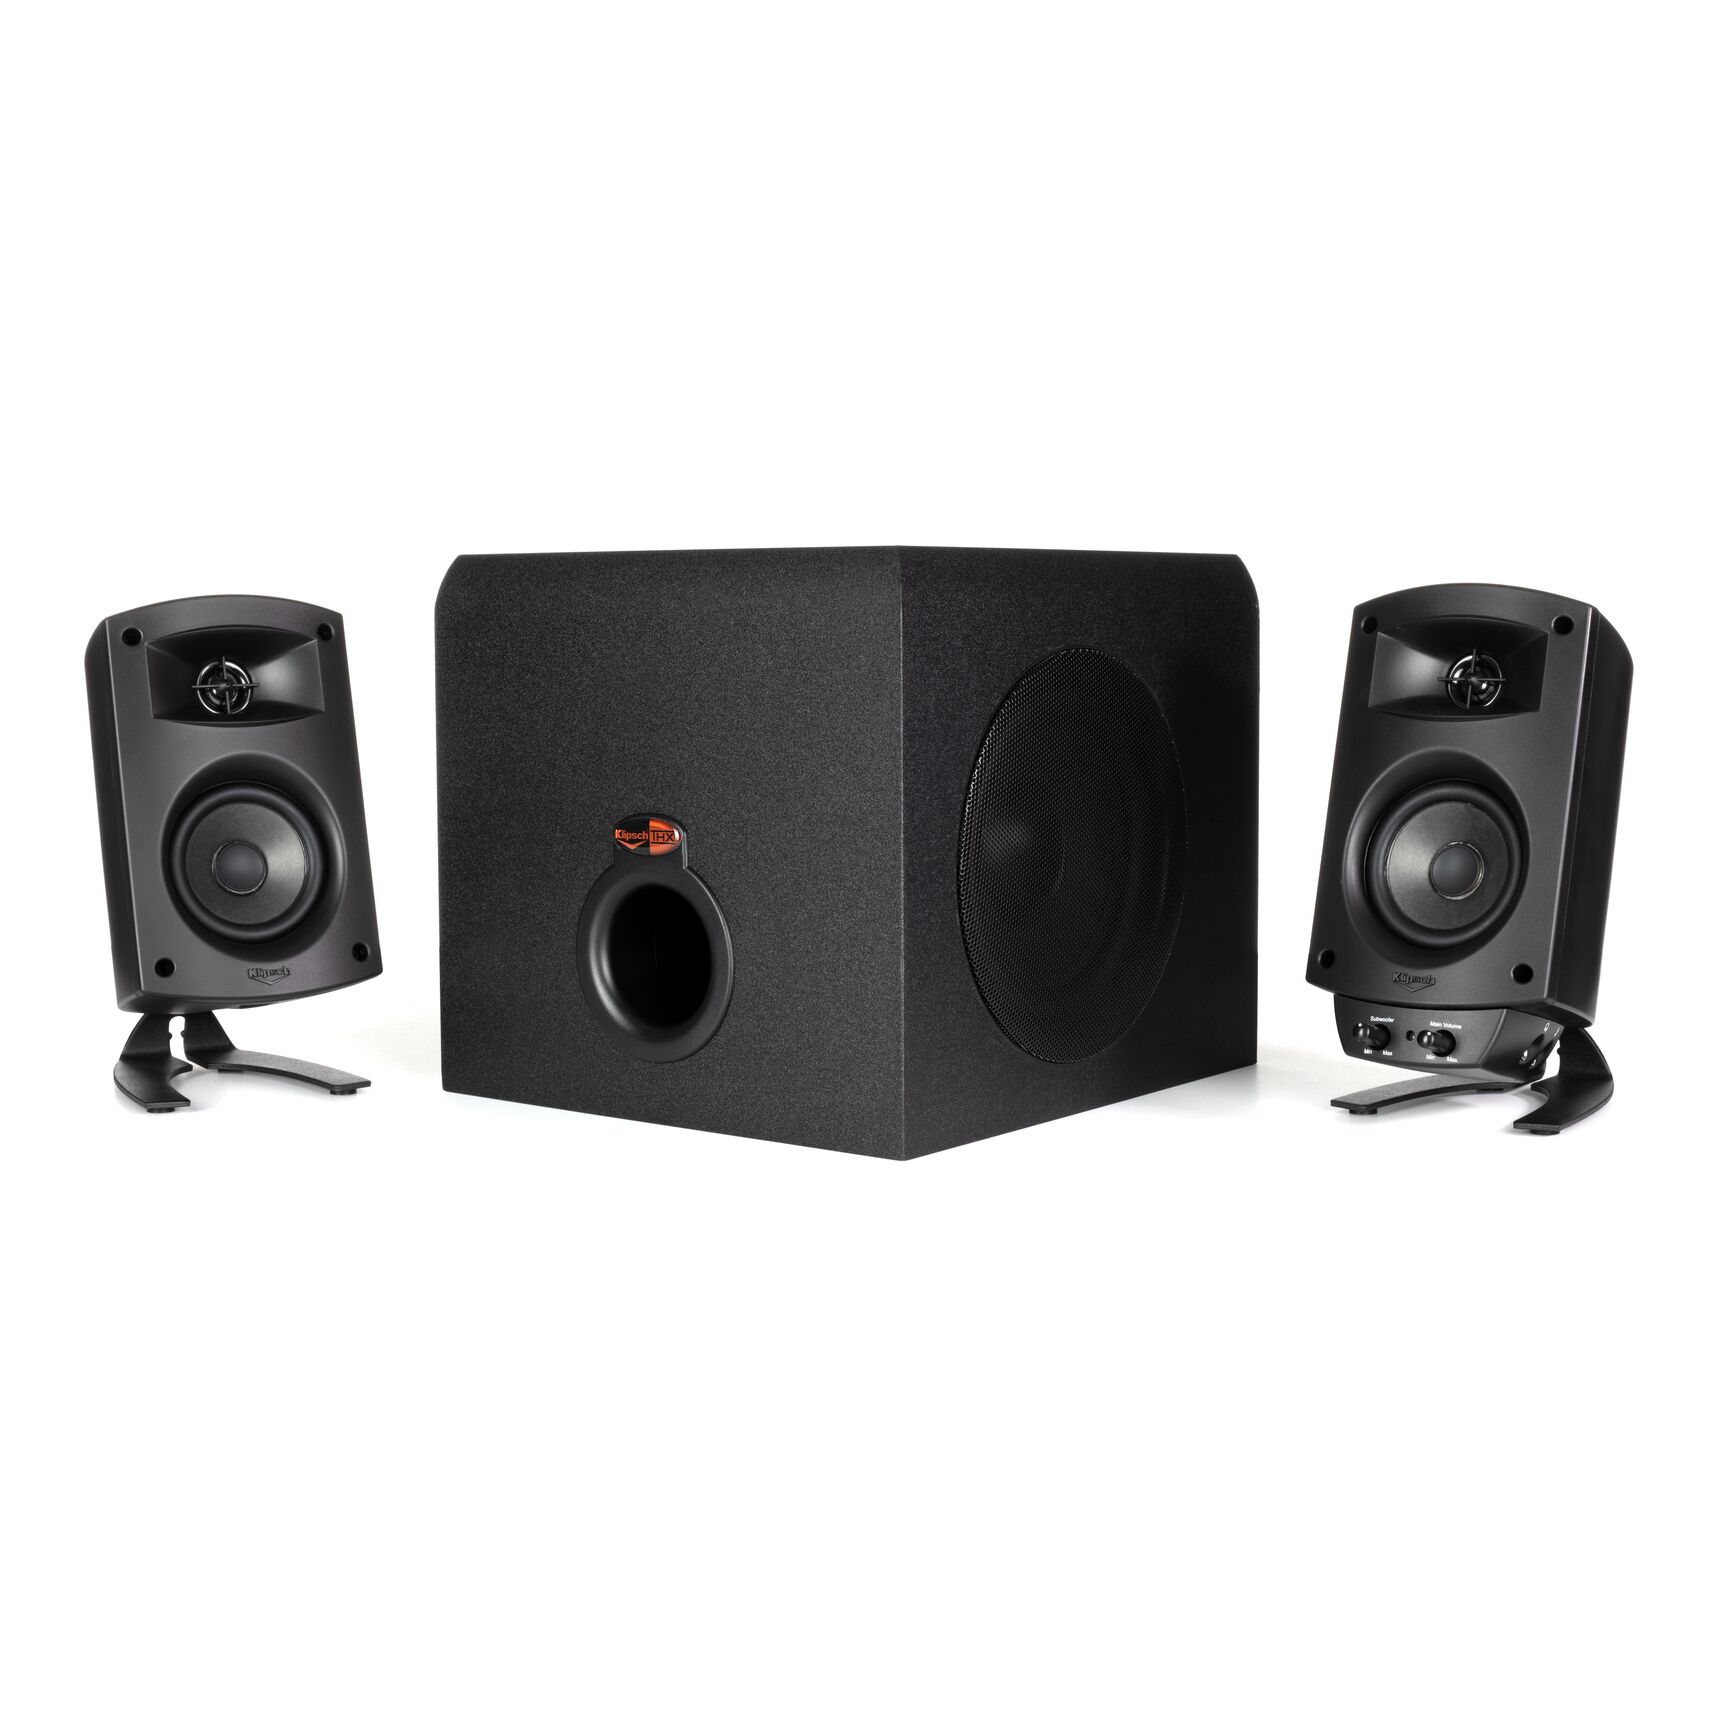 Klipsch Pro Media 2.1 THX Computer Speakers Two-Way Satellites 3" Midbass Drivers and 6.5" Subwoofer - image 2 of 8